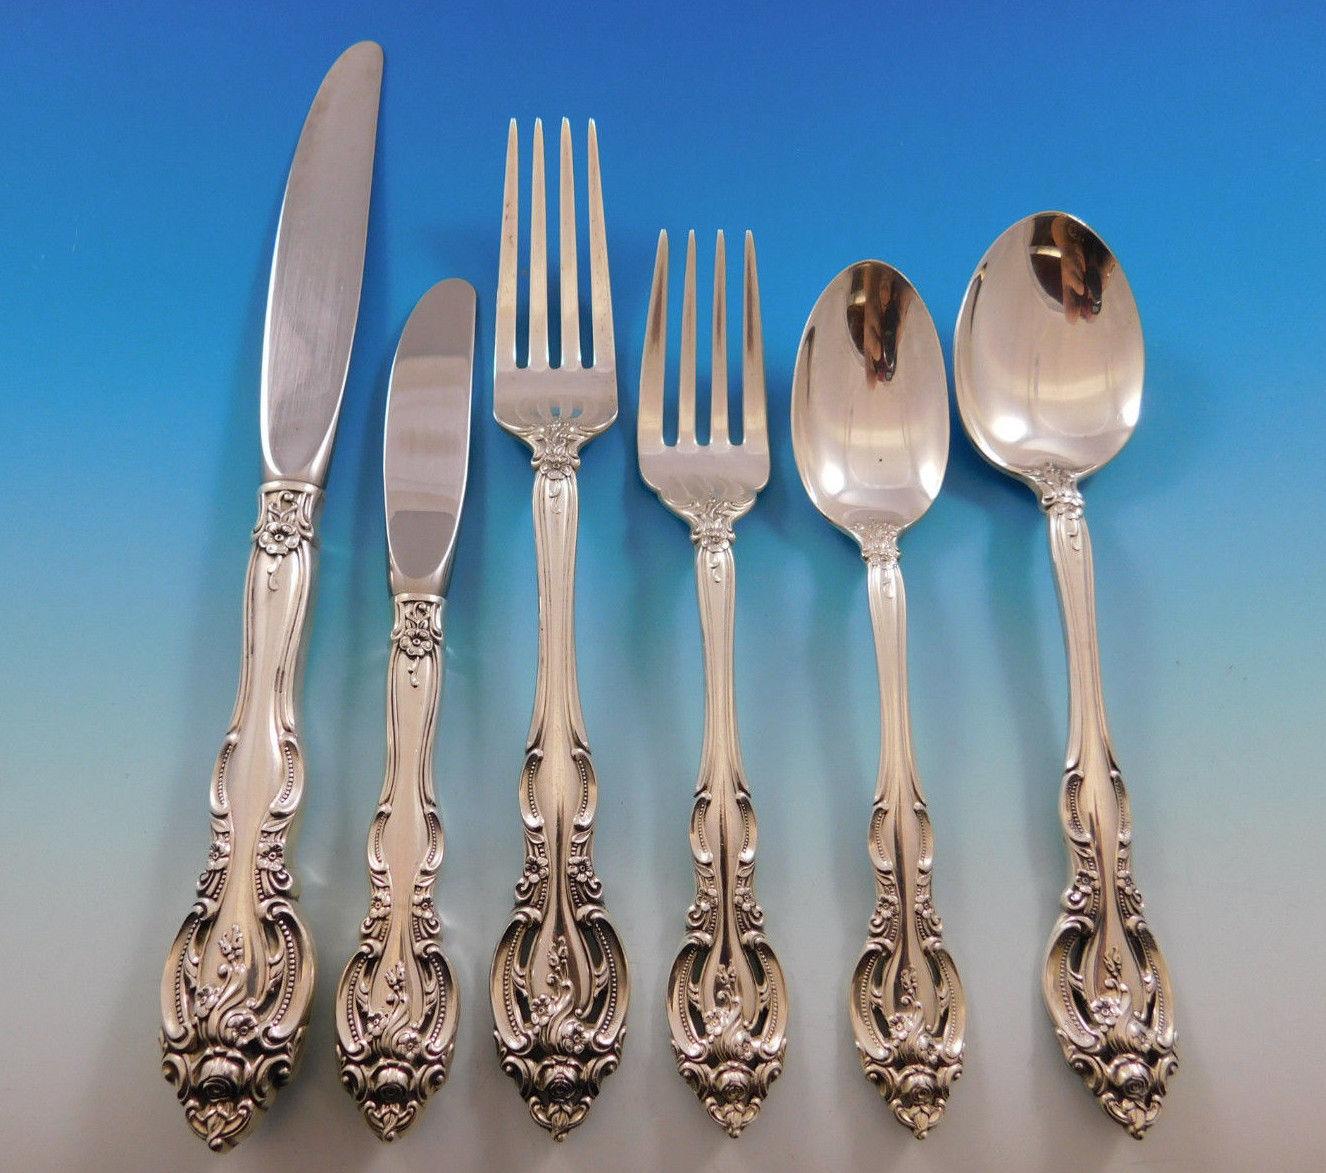 La Scala by Gorham Sterling Silver Flatware set - 51 pieces. This set includes:

Eight knives, 9